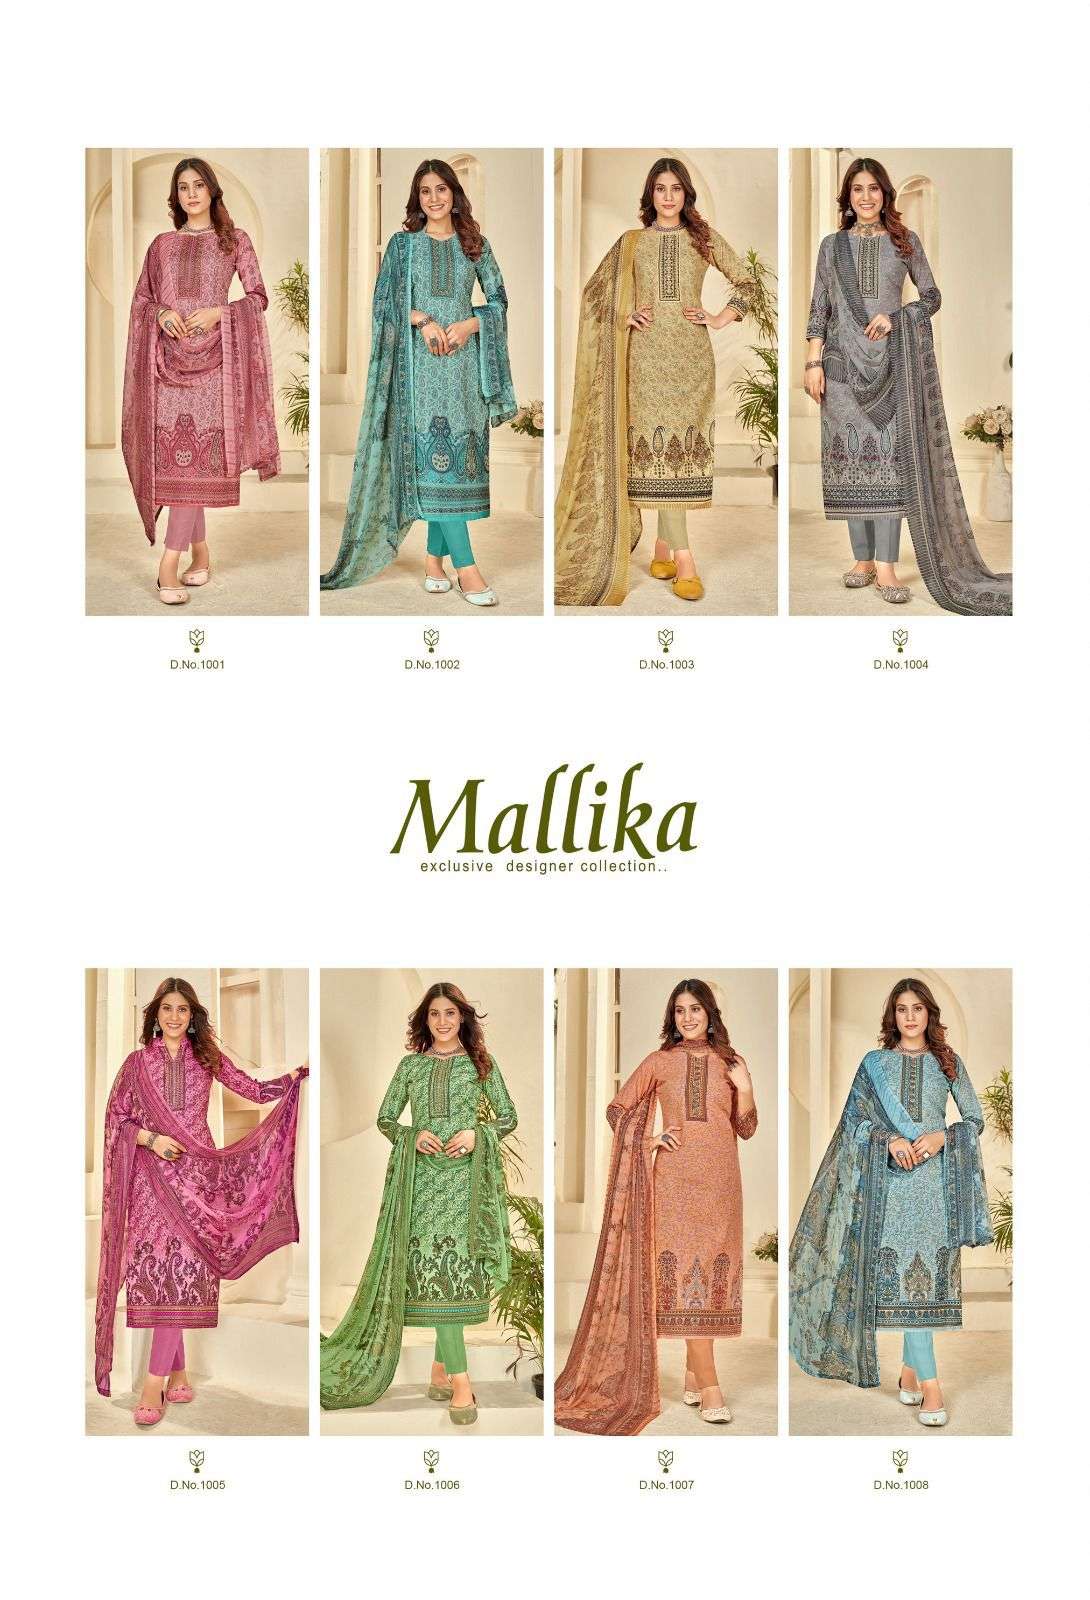 Mallika Vol-9 By Roli Moli 1001 To 1008 Series Beautiful Suits Colorful Stylish Fancy Casual Wear & Ethnic Wear Heavy Cotton Print Dresses At Wholesale Price